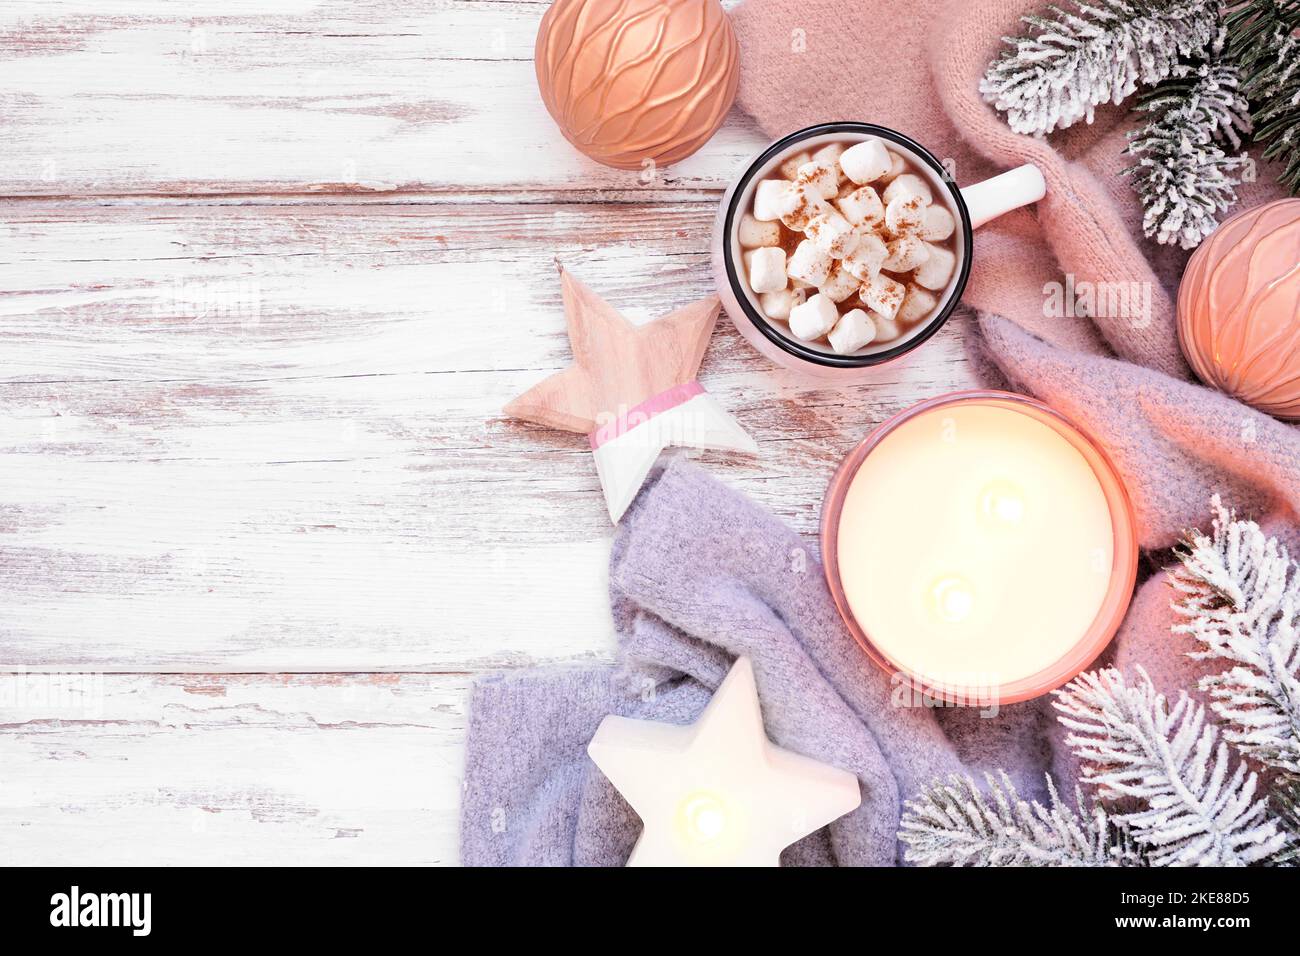 Cozy Christmas or winter side border with grey and dusty pink sweater, candle, hot chocolate, snowy branches and decor. Above view over a rustic white Stock Photo